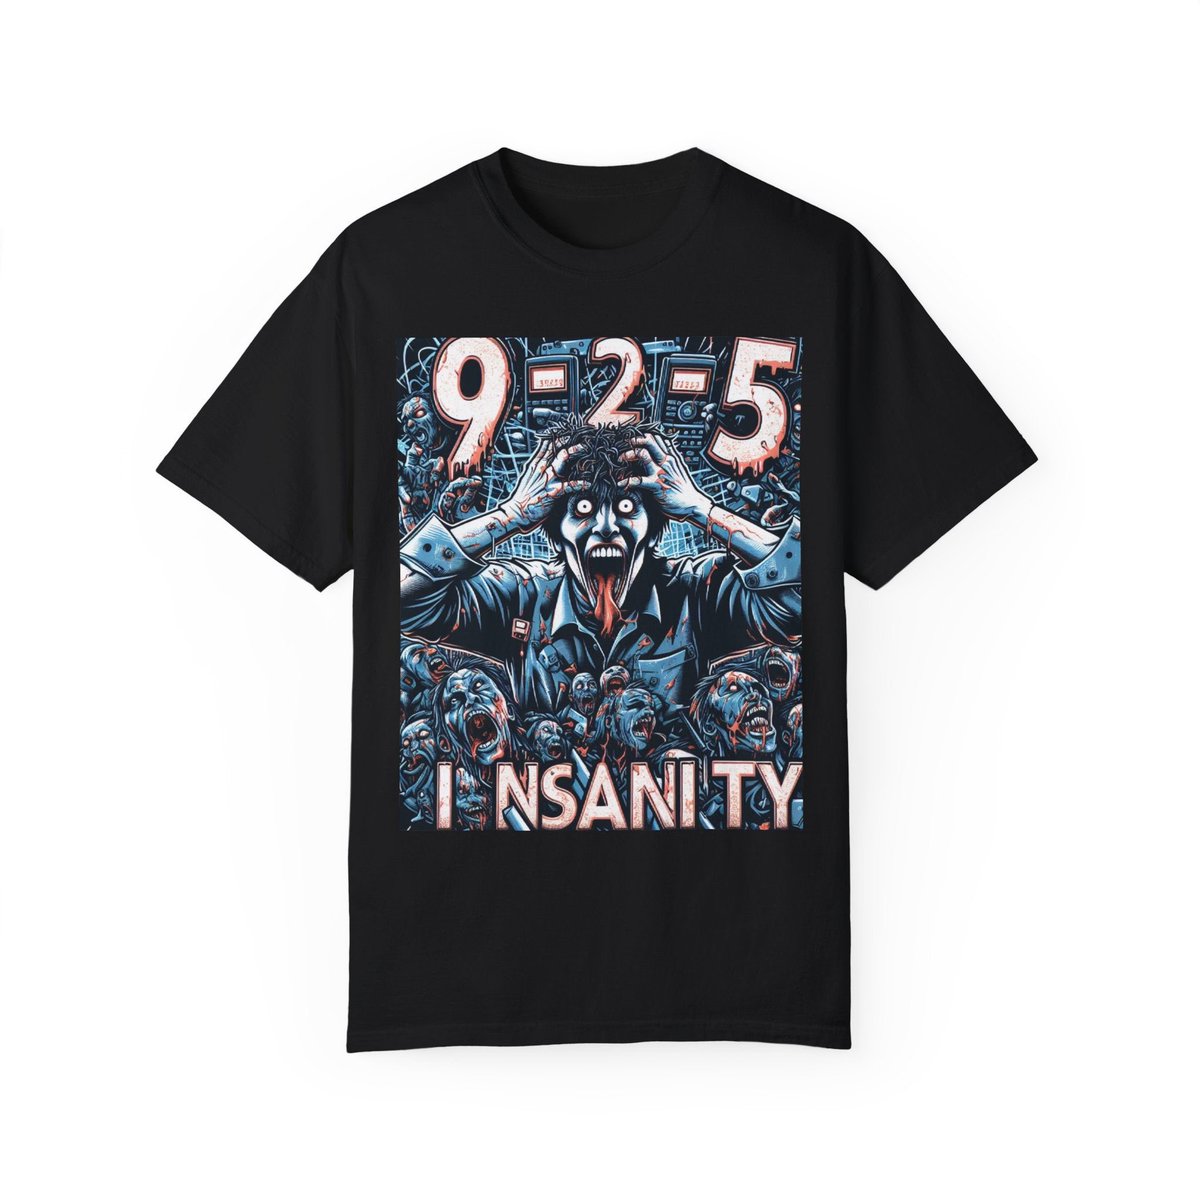 New T-shirt Added to shop 
agitatedboutique.myshopify.com/products/9-2-5… #925insanity #tshirt  #insanitytshirt #AgitatedBoutique #crazyshirts #zombieshirts #zombietee #zombietshirt